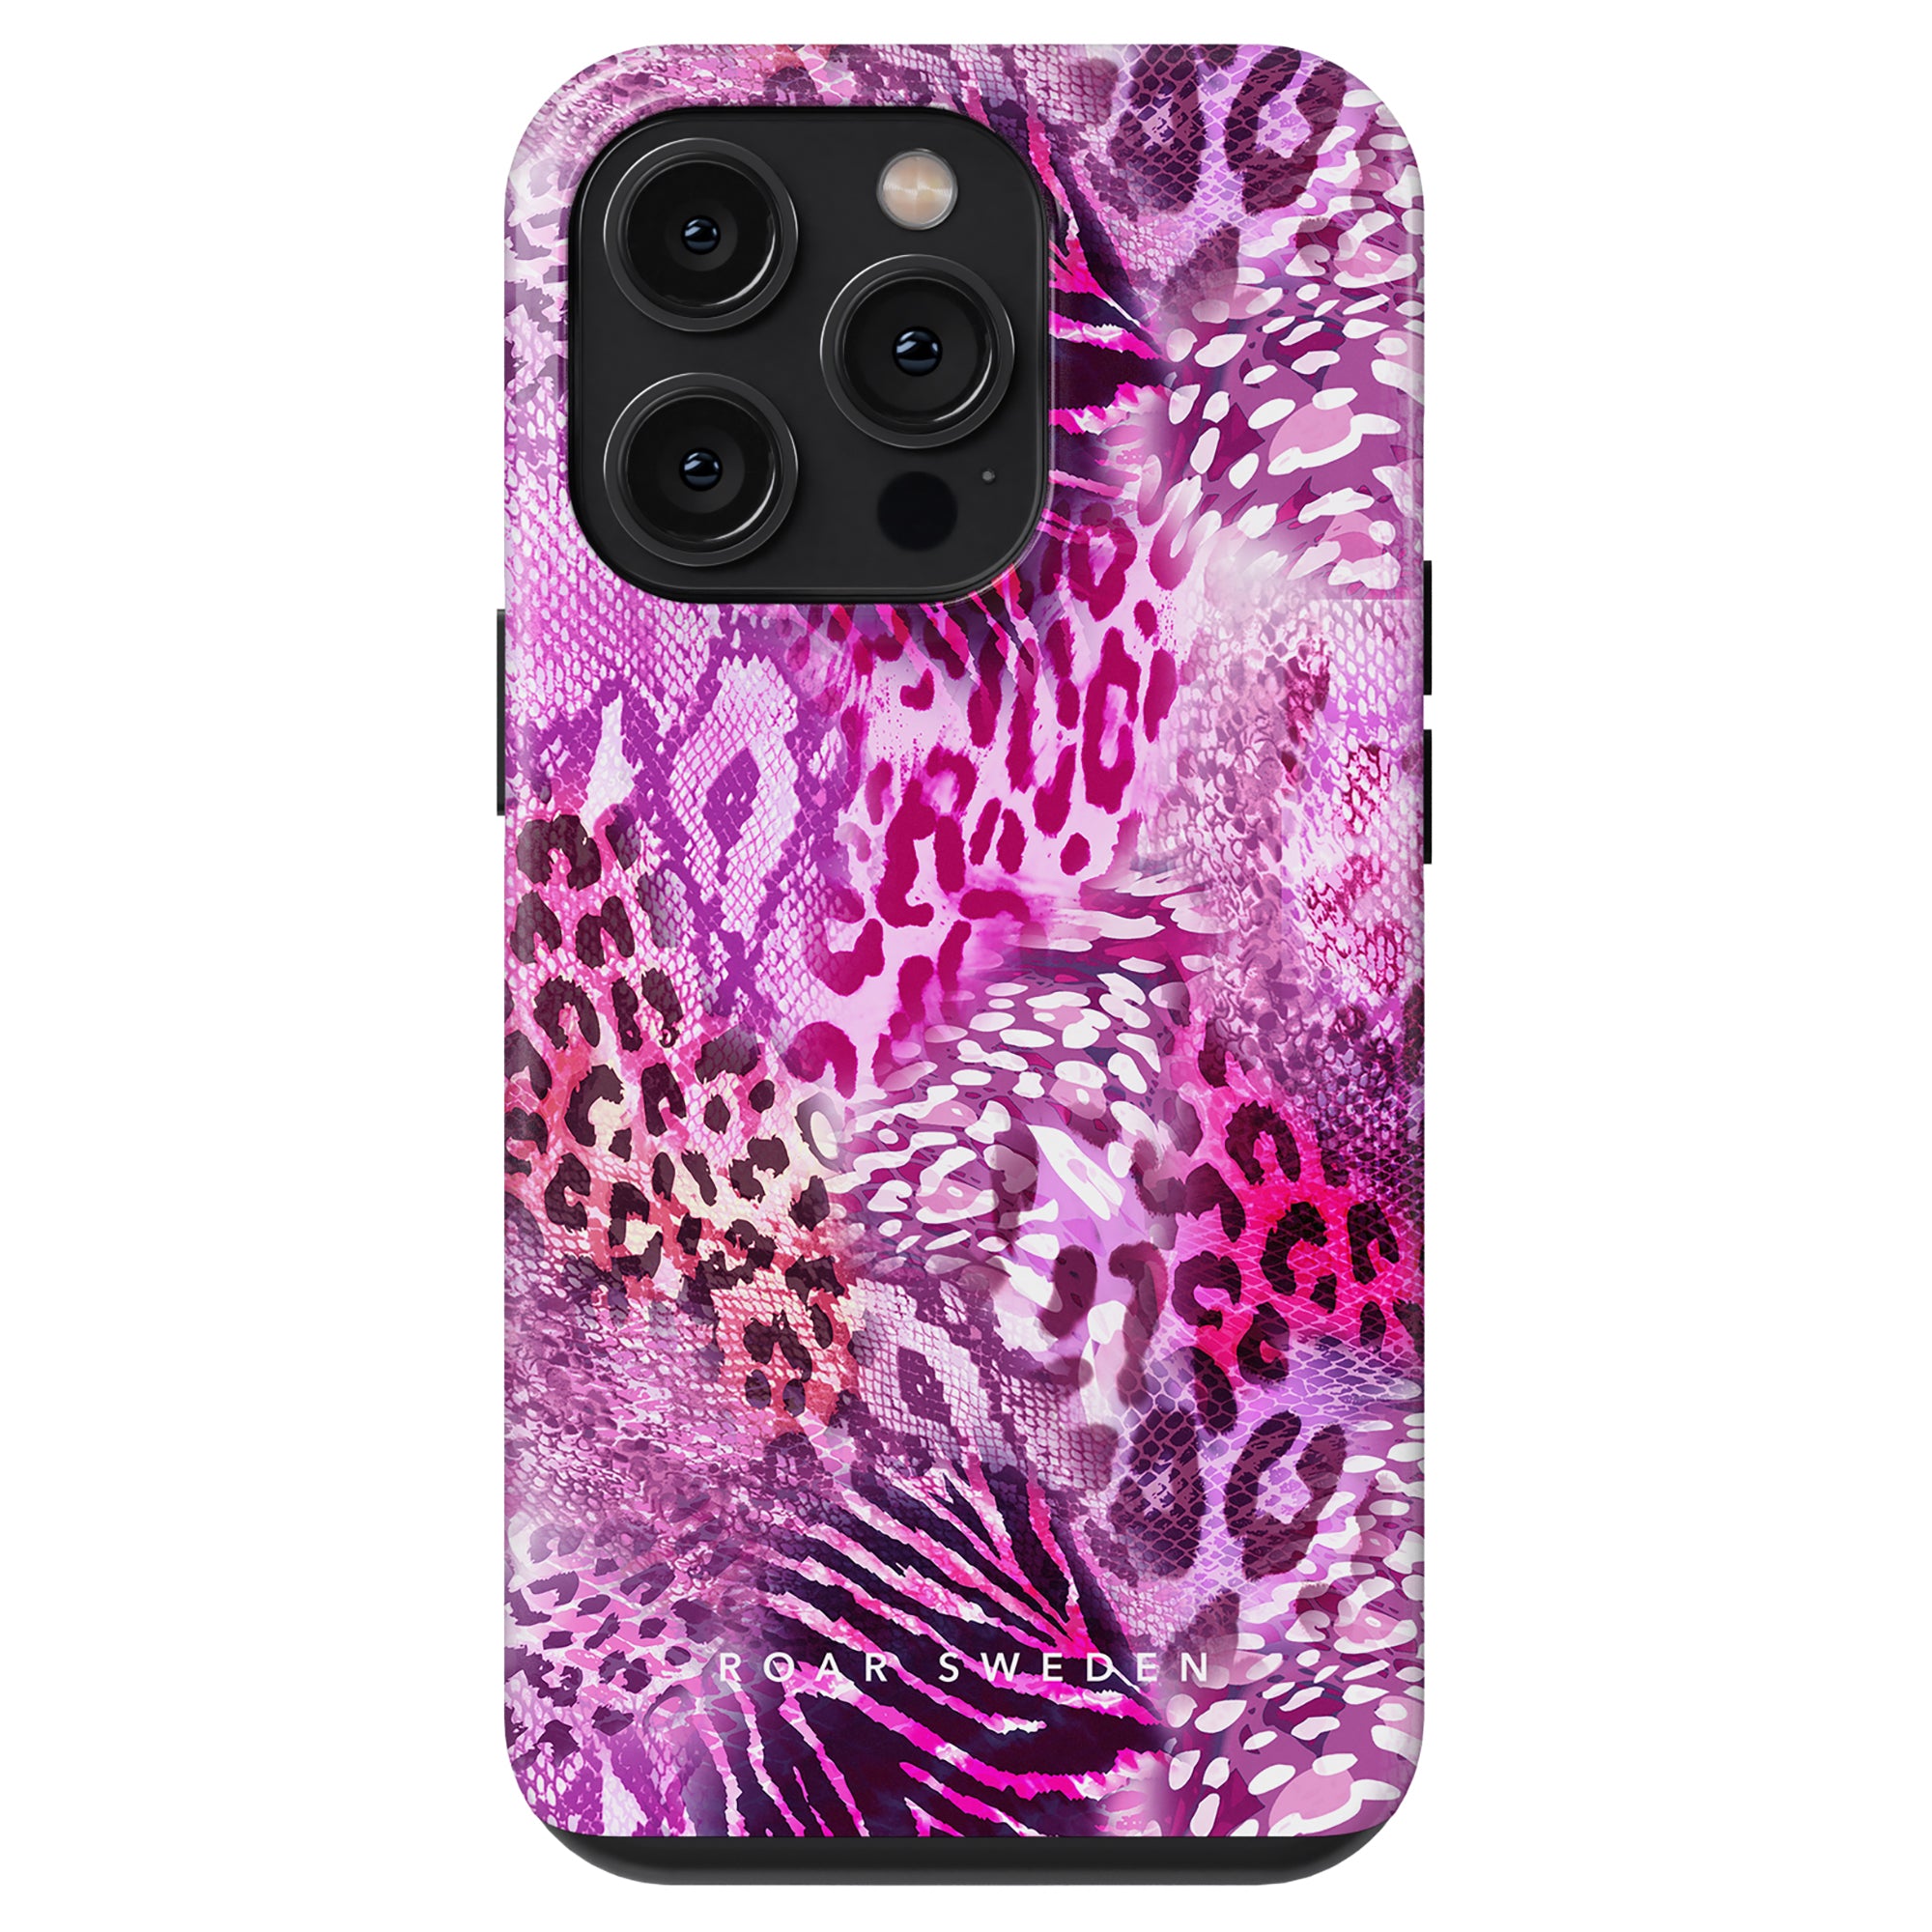 A smartphone case from the Swirl Leopard - Tough Case featuring a vibrant pink and purple animal print design with three camera lens cutouts at the top.